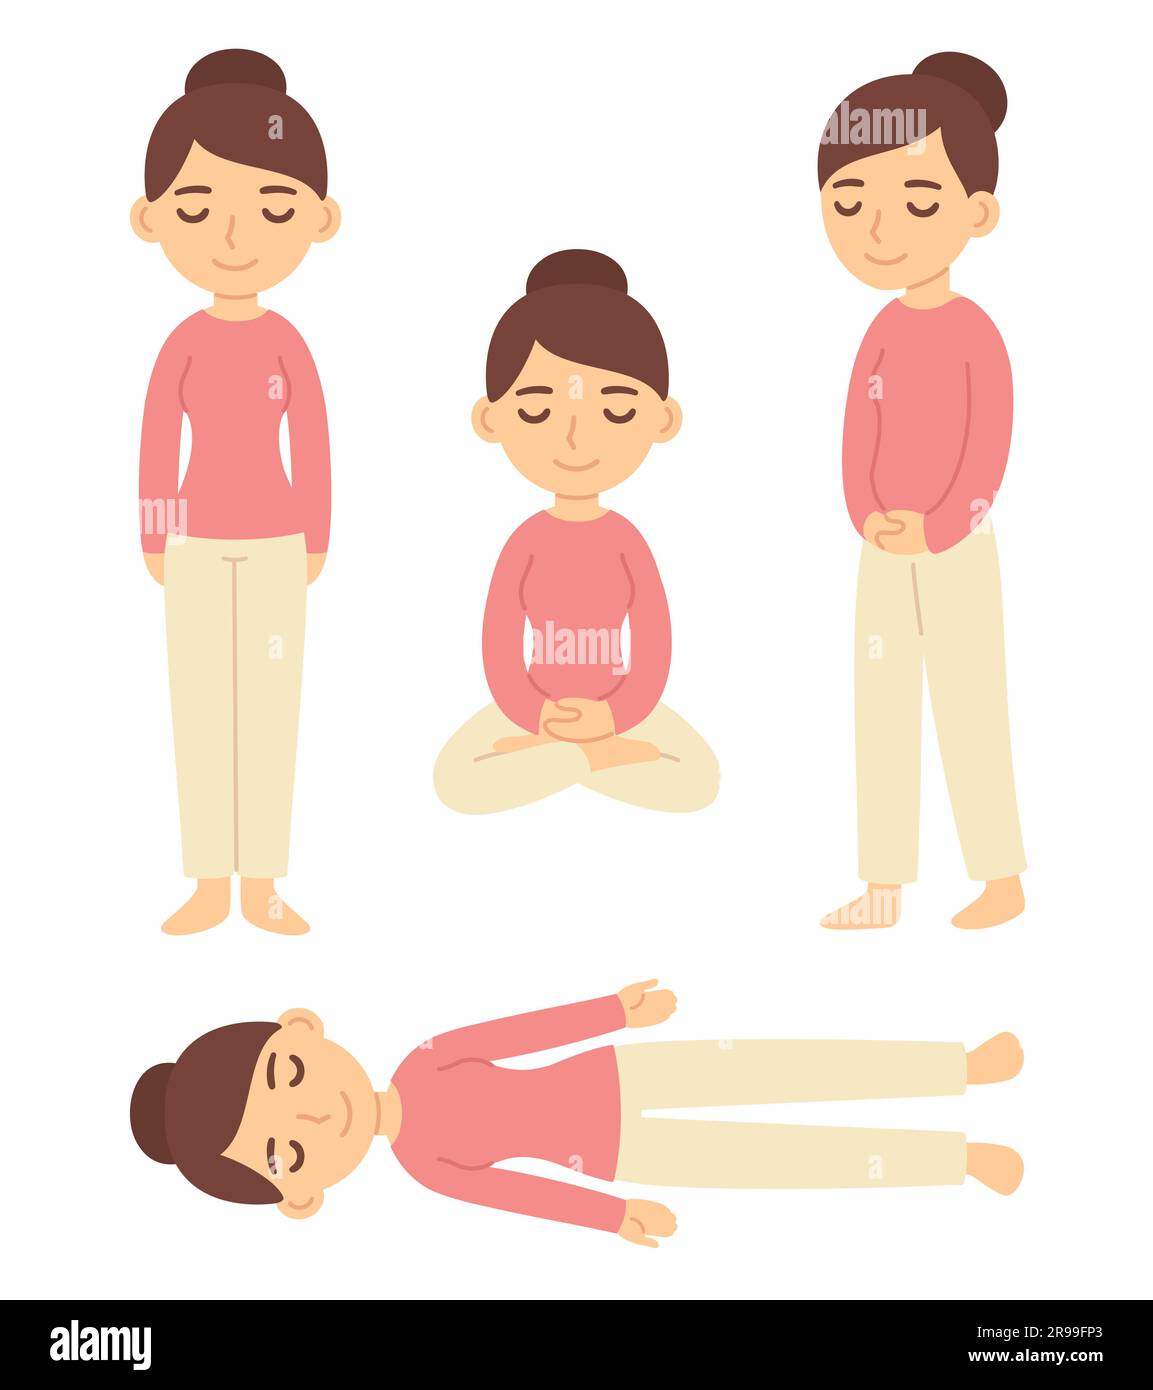 Cute Yoga Vector, Sticker Clipart Four Different Poses Of Girl Meditating  In The Poses Cartoon, Sticker, Clipart PNG and Vector with Transparent  Background for Free Download